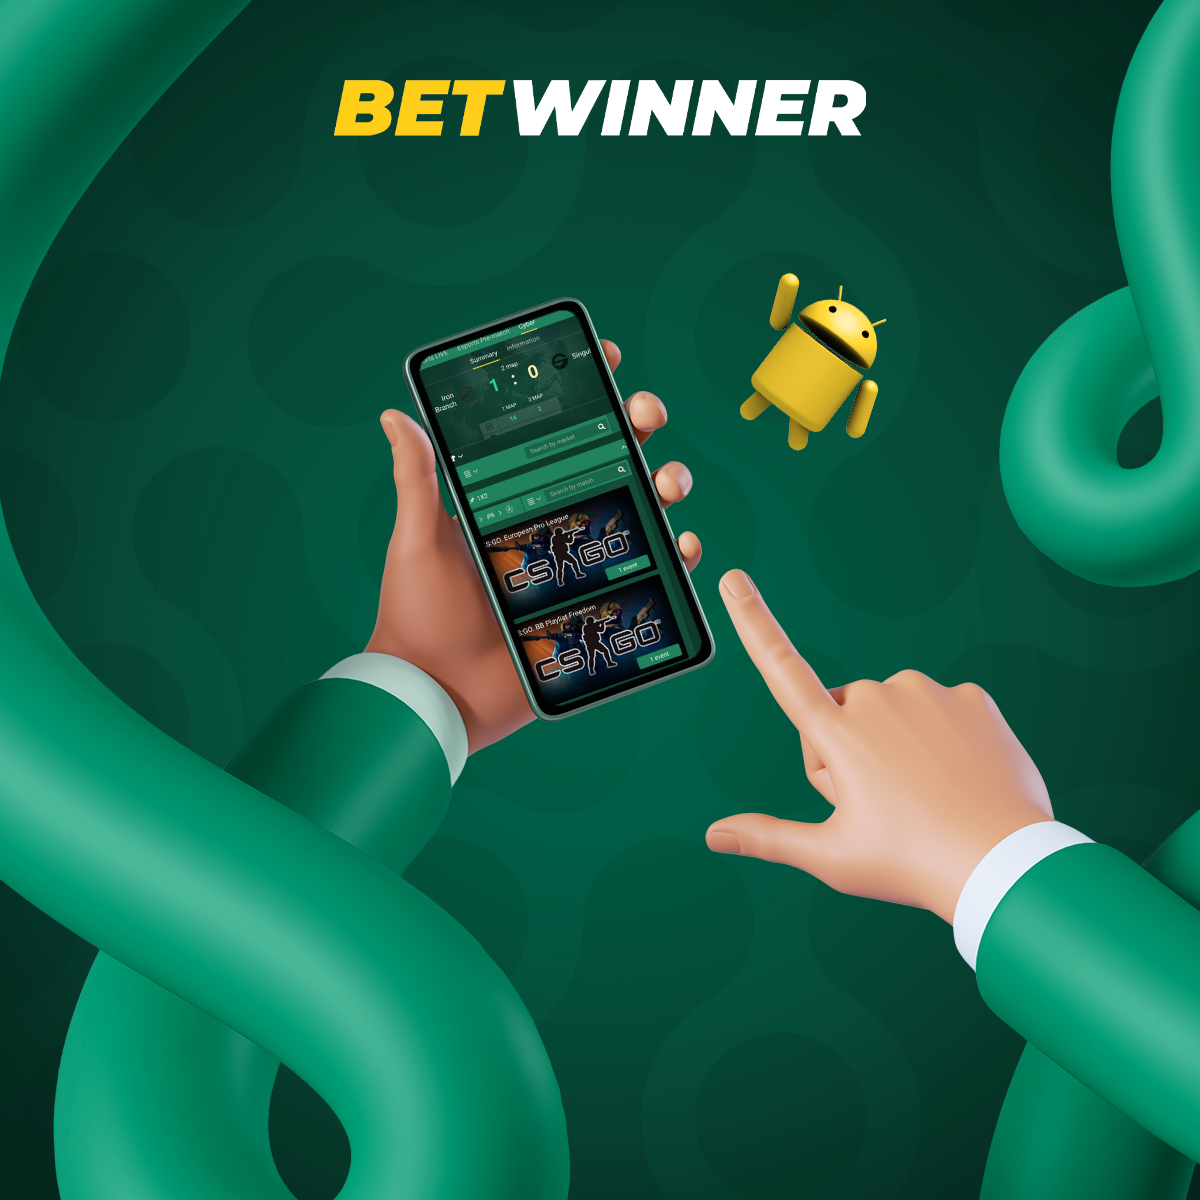 Now You Can Have Your Withdraw from Betwinner FR Done Safely